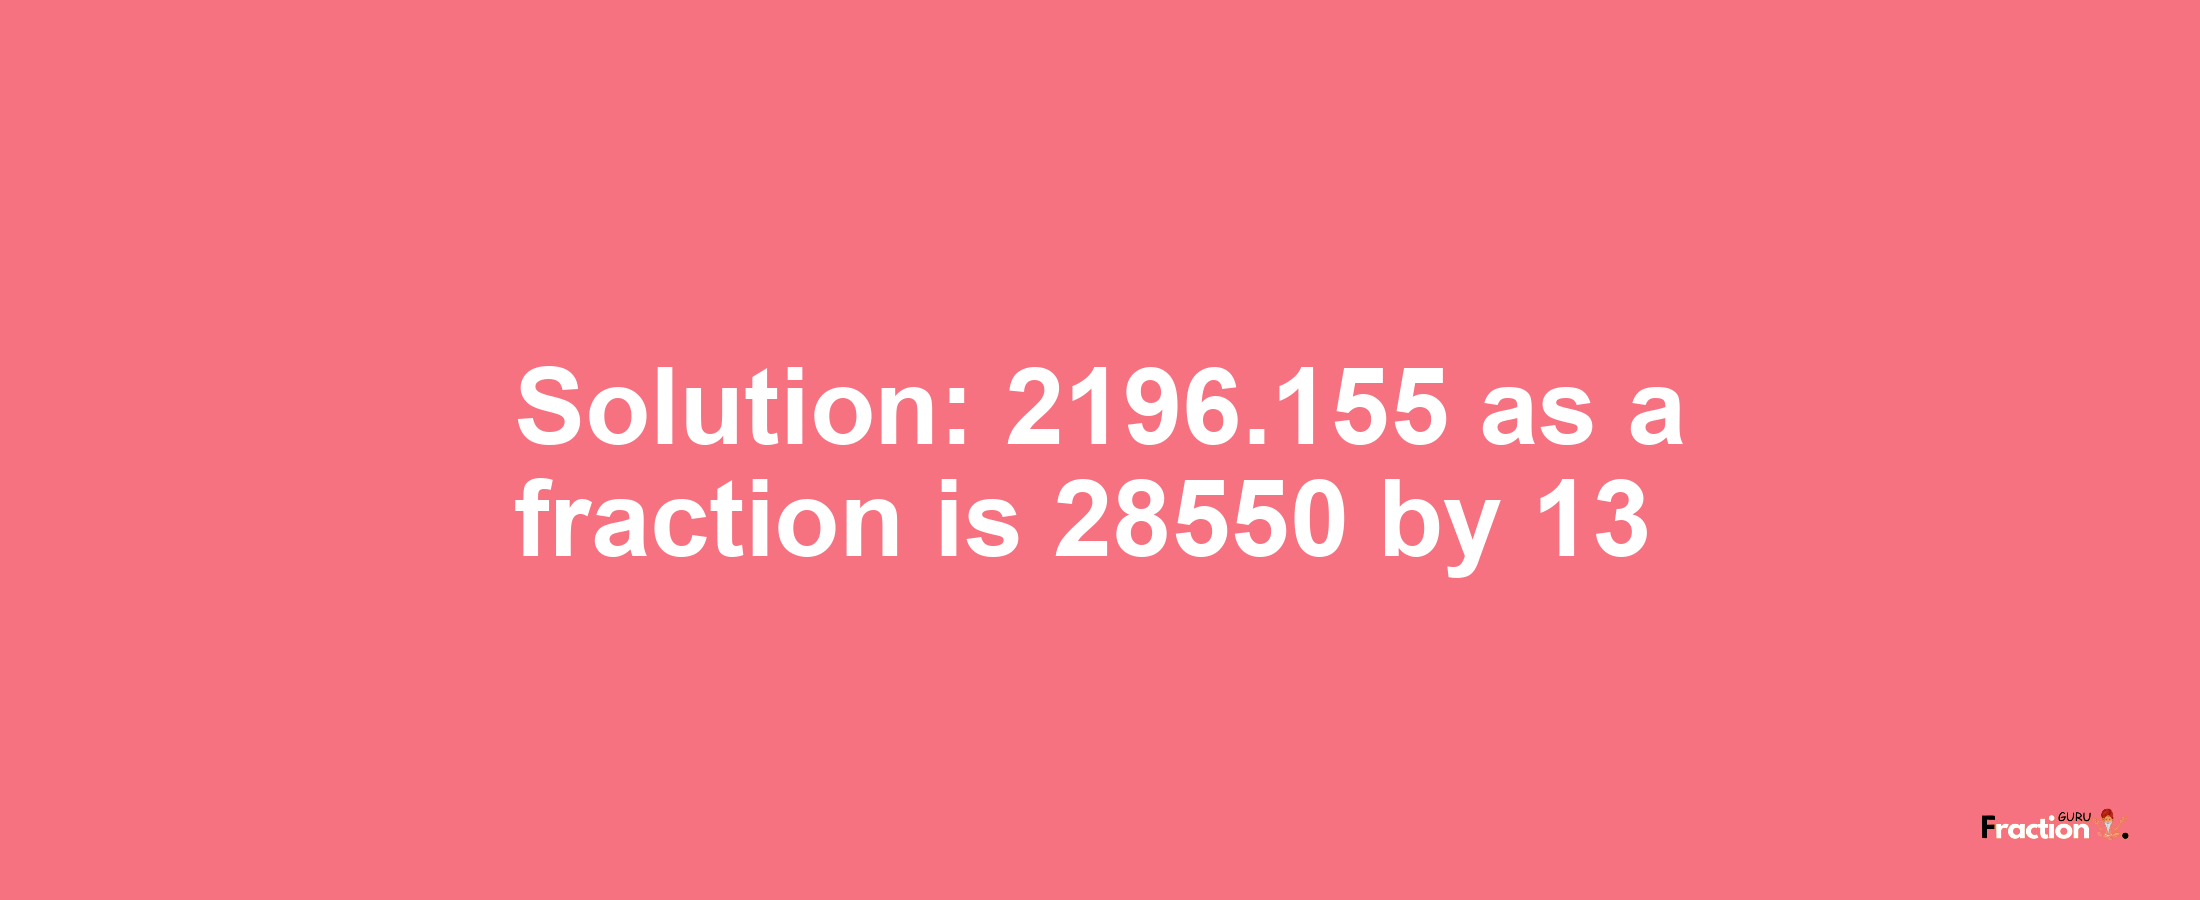 Solution:2196.155 as a fraction is 28550/13